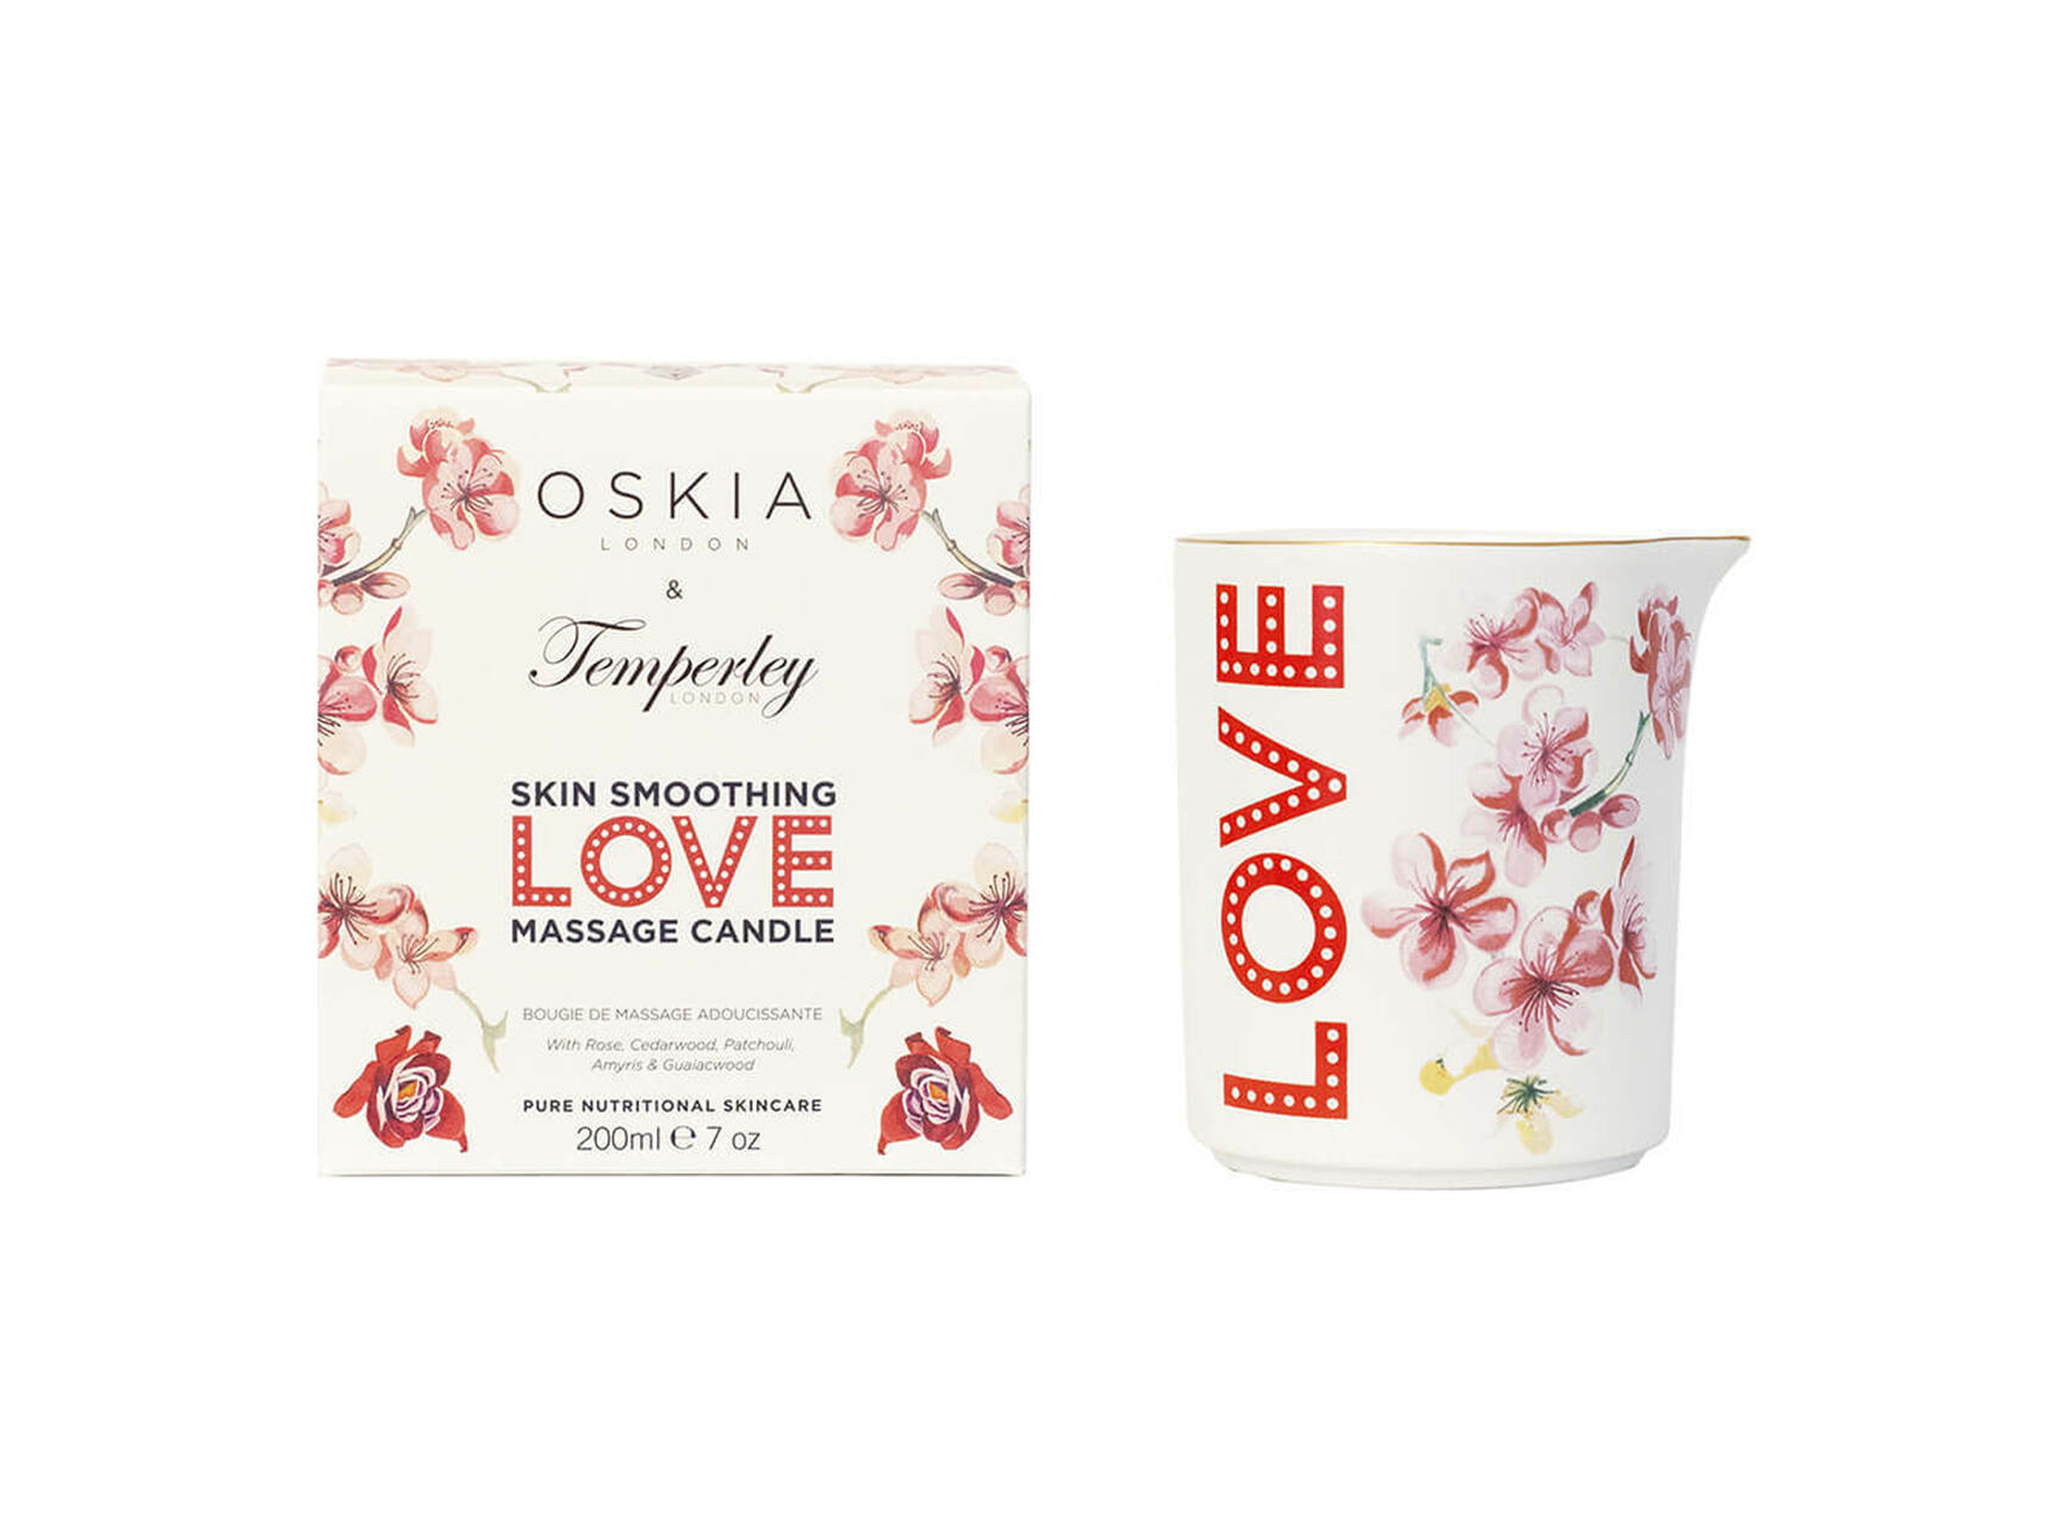 Oskia London and Alice Temperley Love massage candle